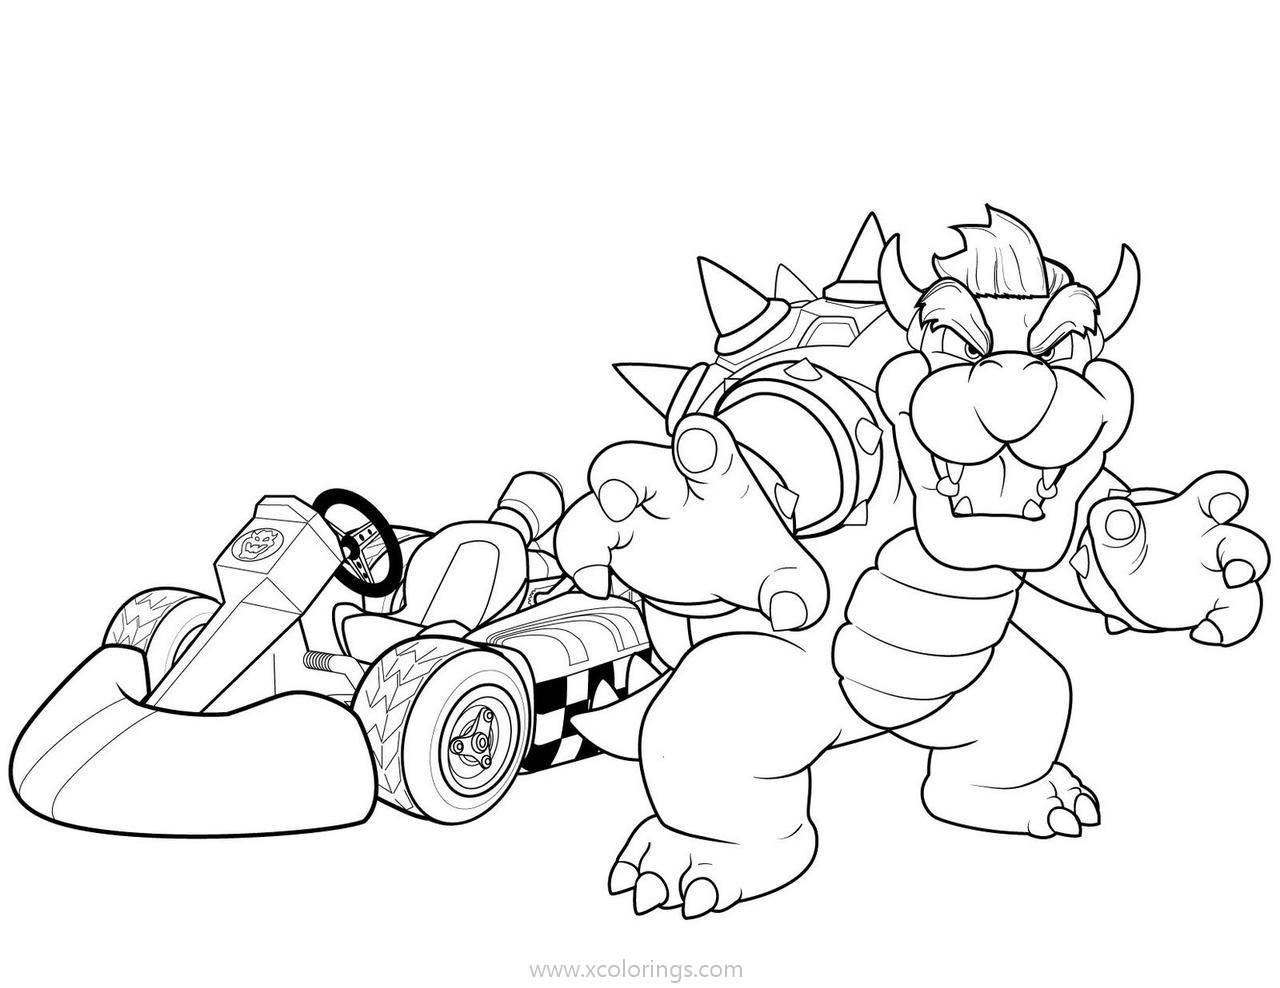 Free Bowser Coloring Pages from Mario Kart printable